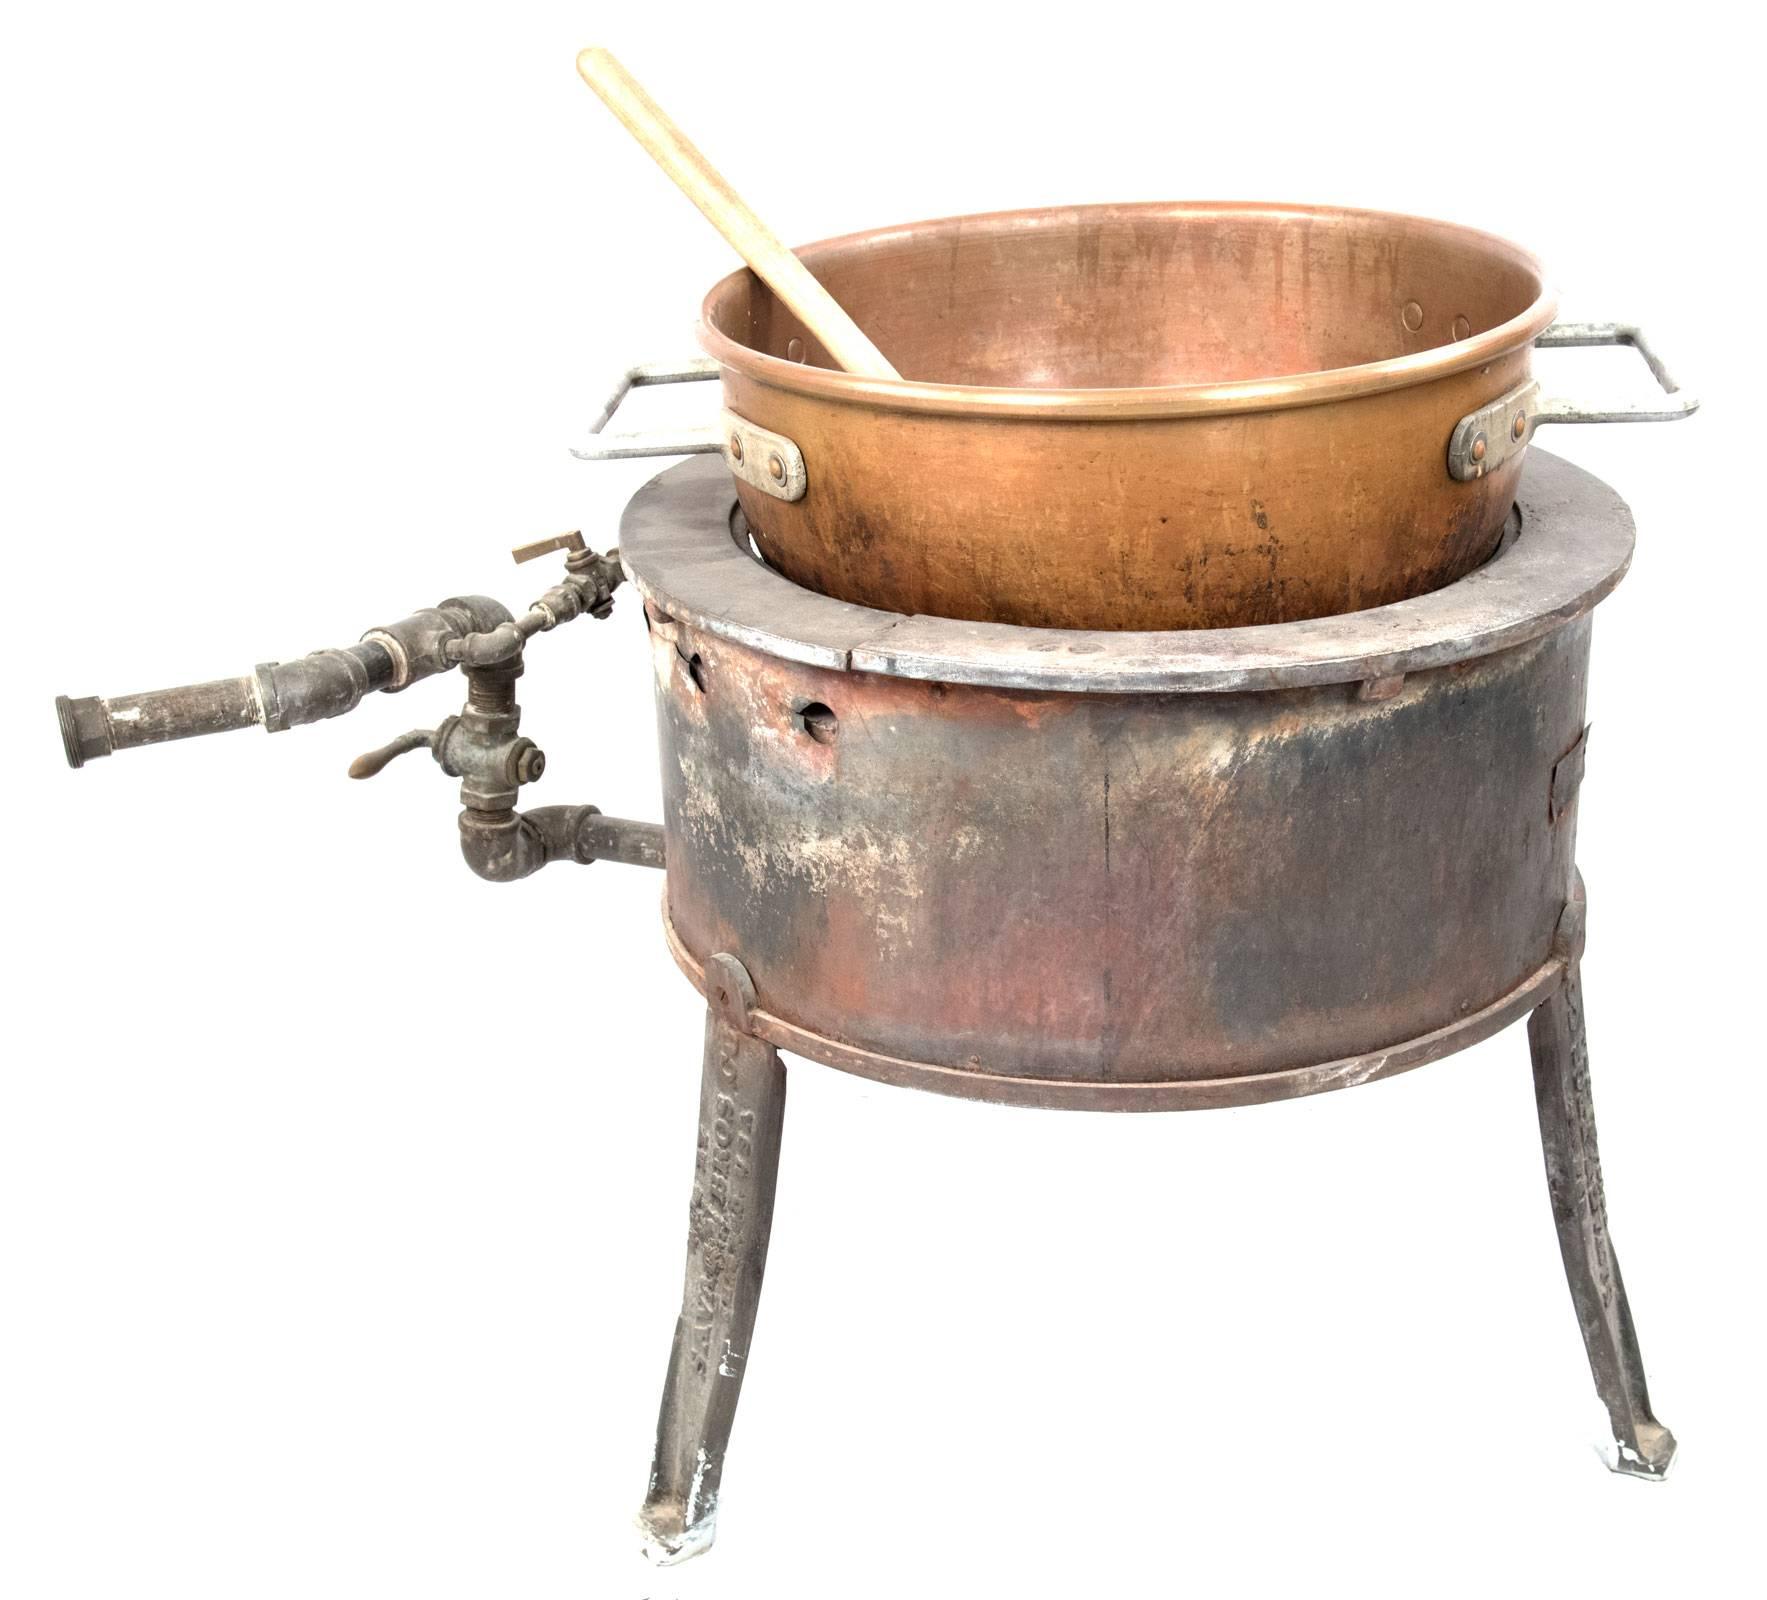 A large candy-making copper bowl with steel handles, fitted within a gas burner, made by the American company, Savage Bros. Co., which was established in 1855.